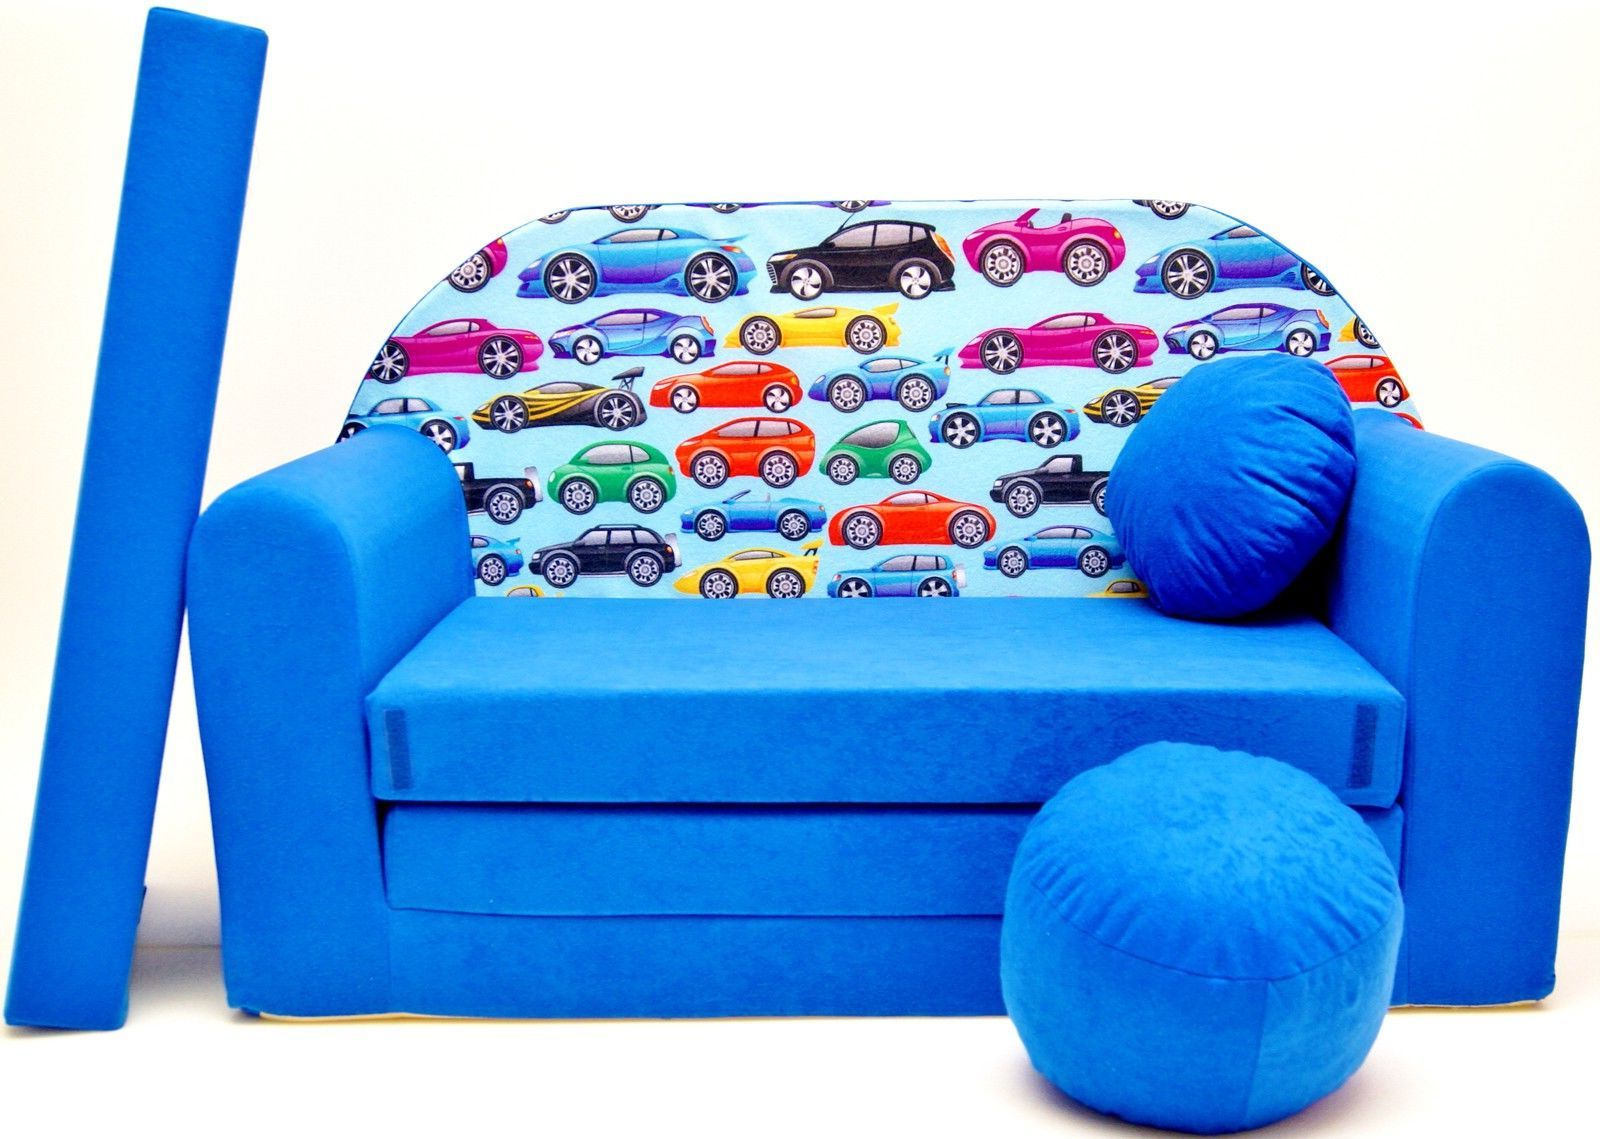 Childrens Sofa Bed Type W, Fold Out Sofa Foam Bed For Children + Free Inside Children's Sofa Beds (Gallery 4 of 20)